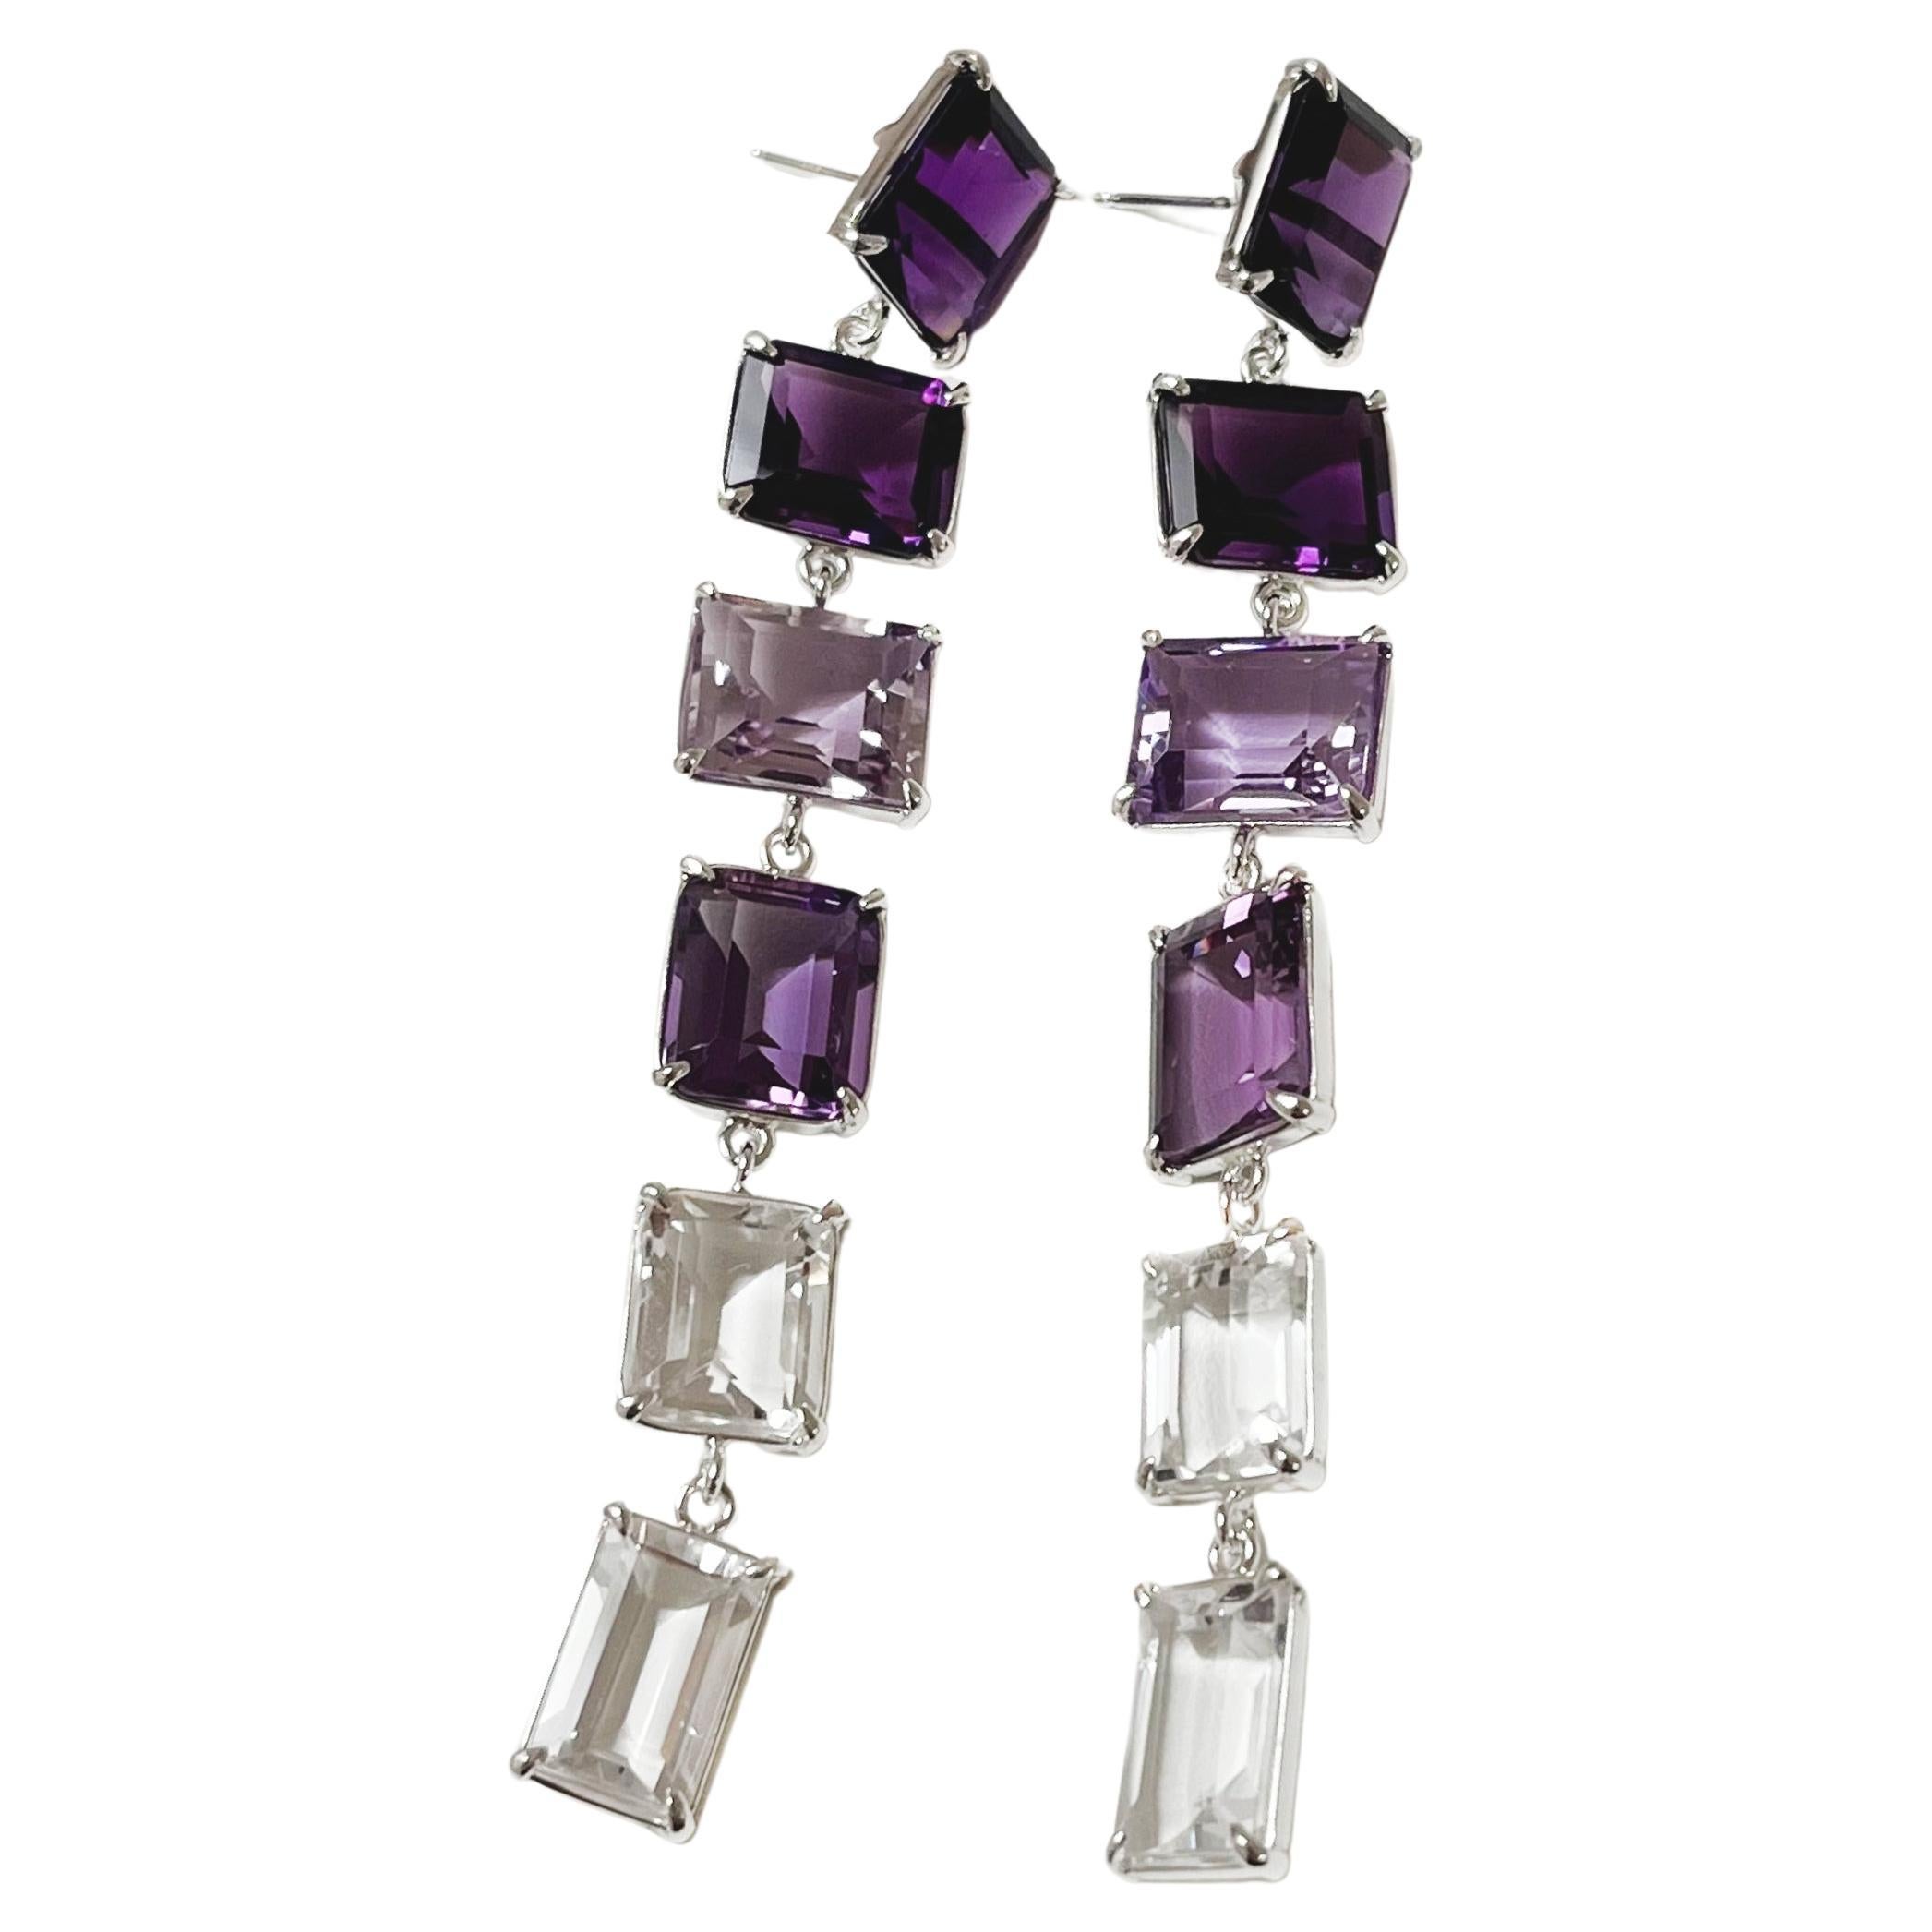 Amy Earrings in Amethyst, White Topaz and Sterling Silver For Sale